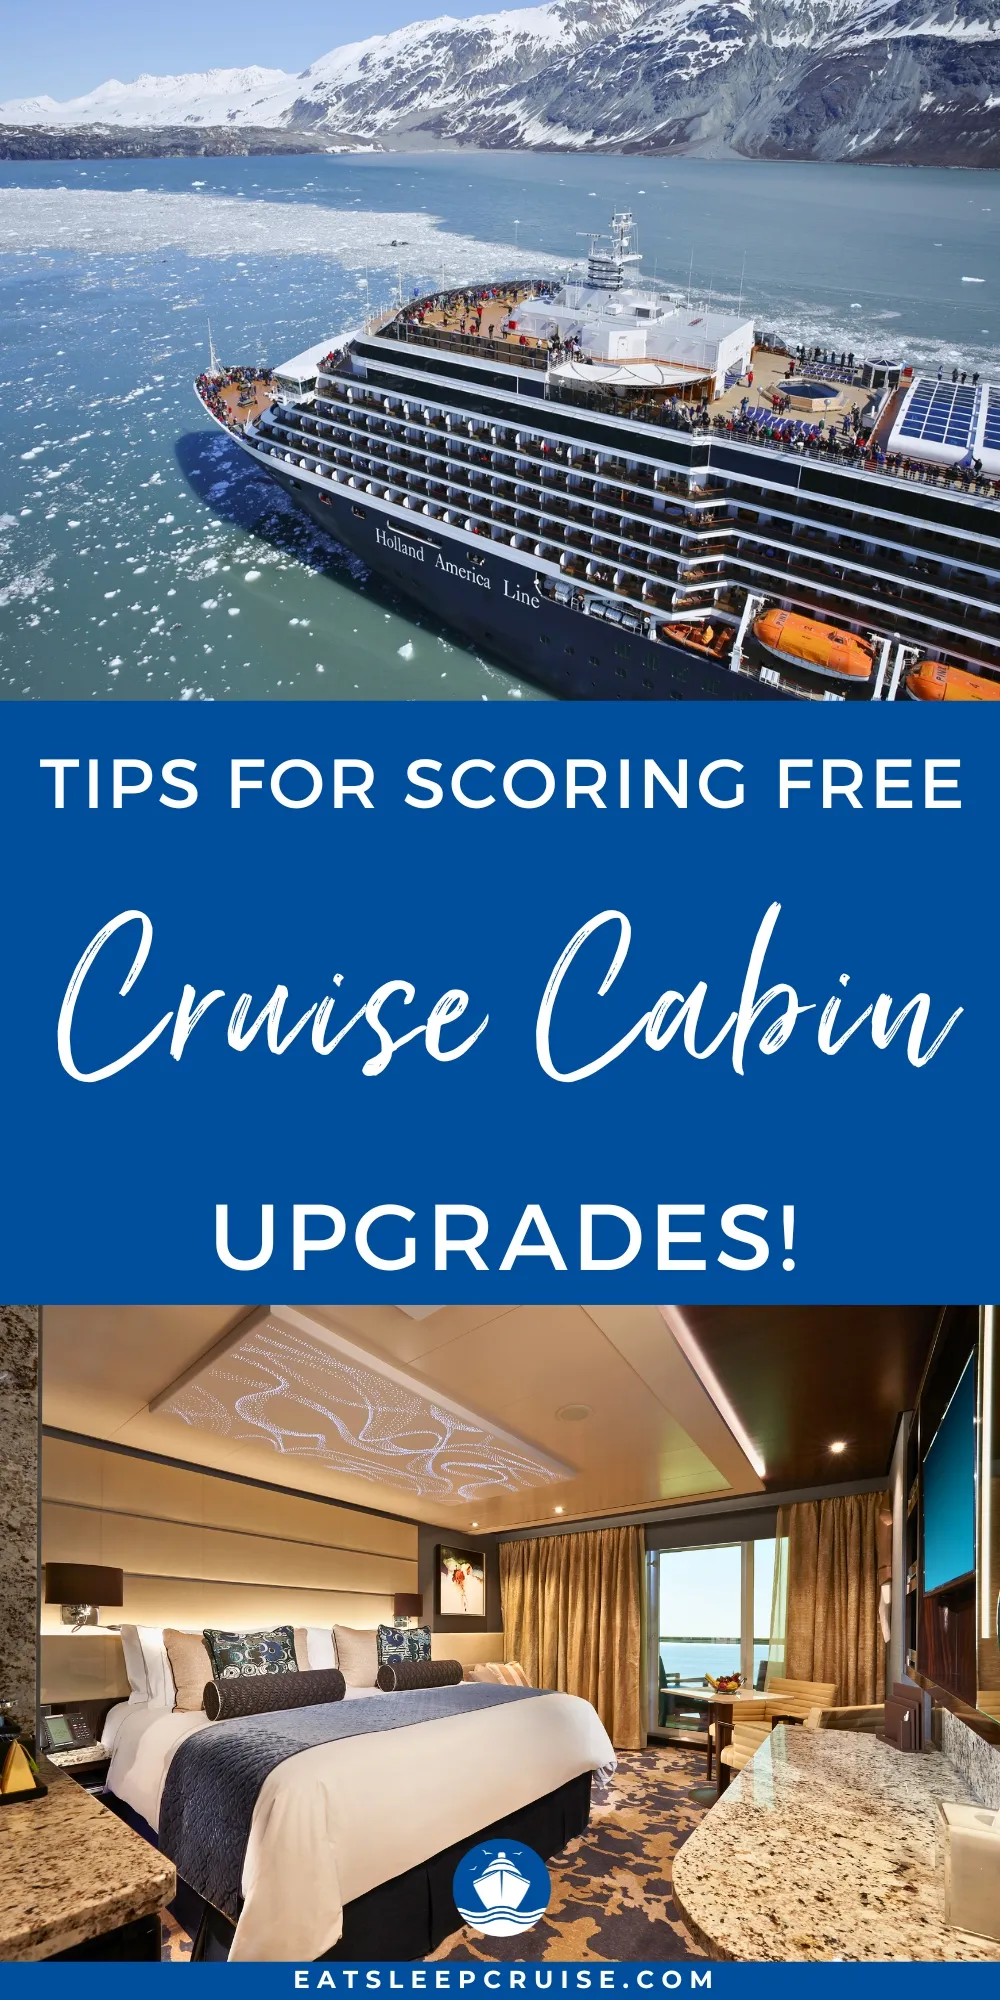 10 Easy Ways to Get Cruise Cabin Upgrades on Your Next Trip